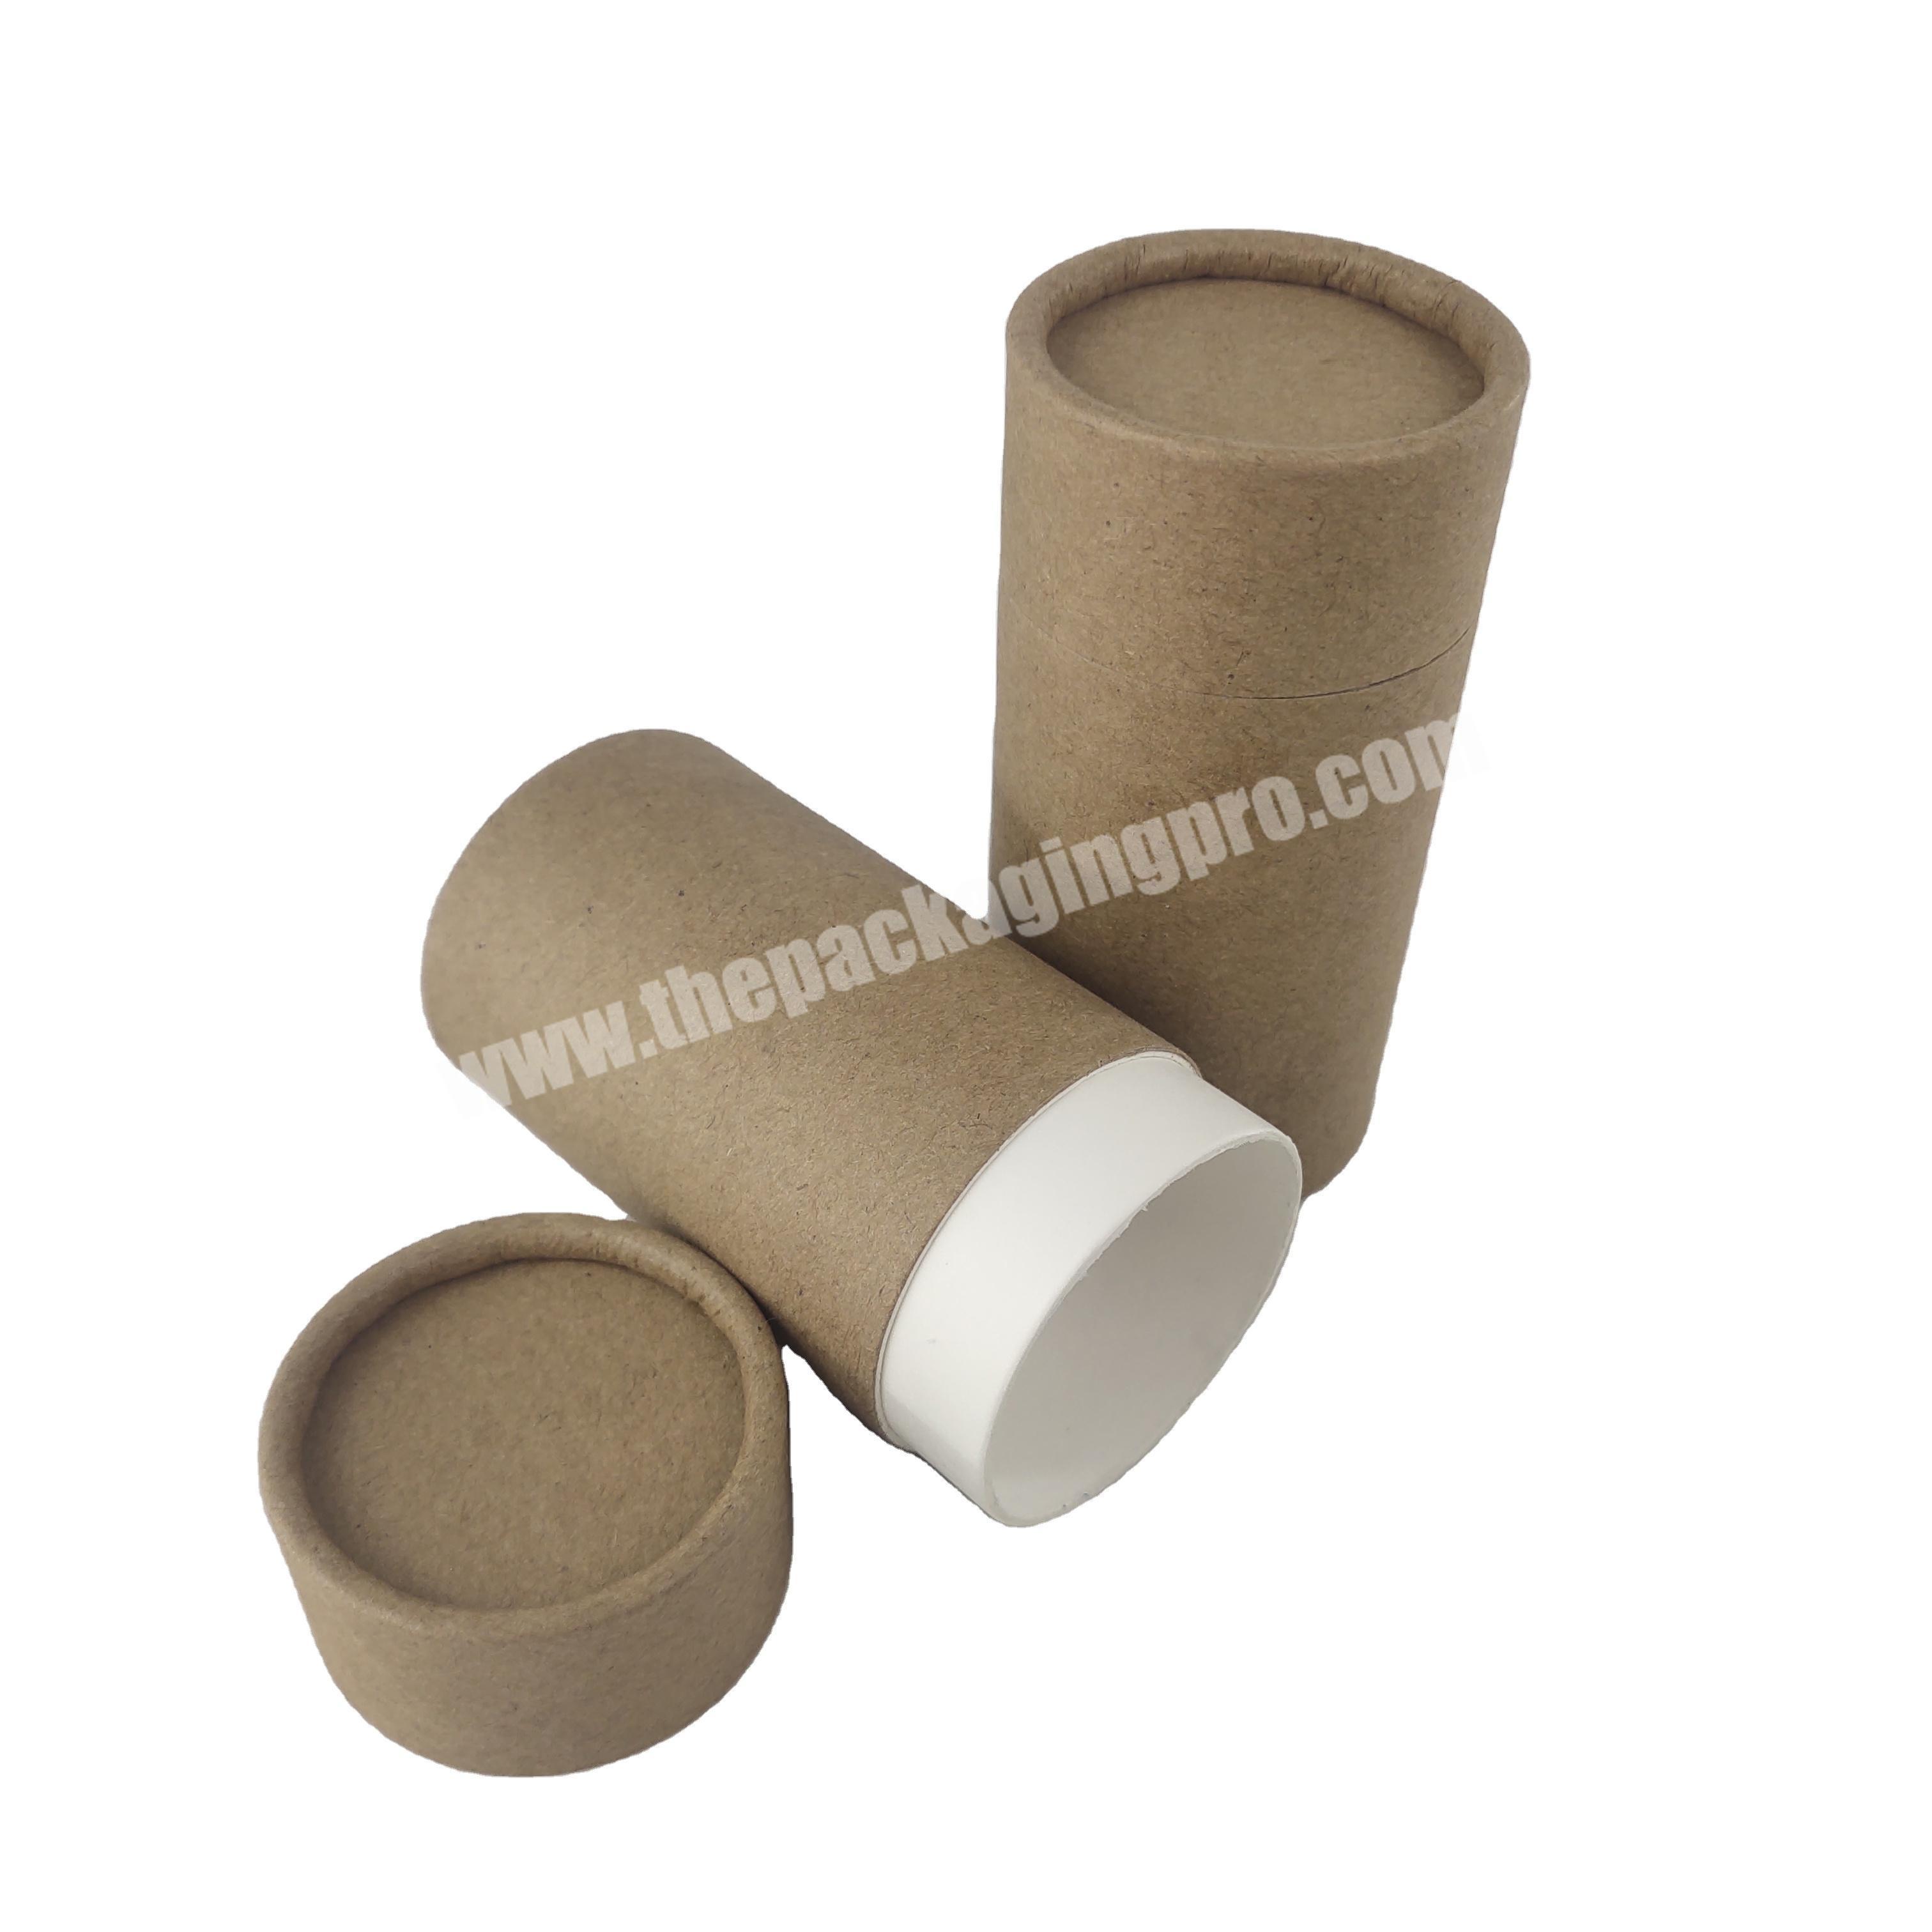 Best Price 0.3 oz Packaging Kraft Cardboard for Lip Balm Deodorant Container Paper Tube